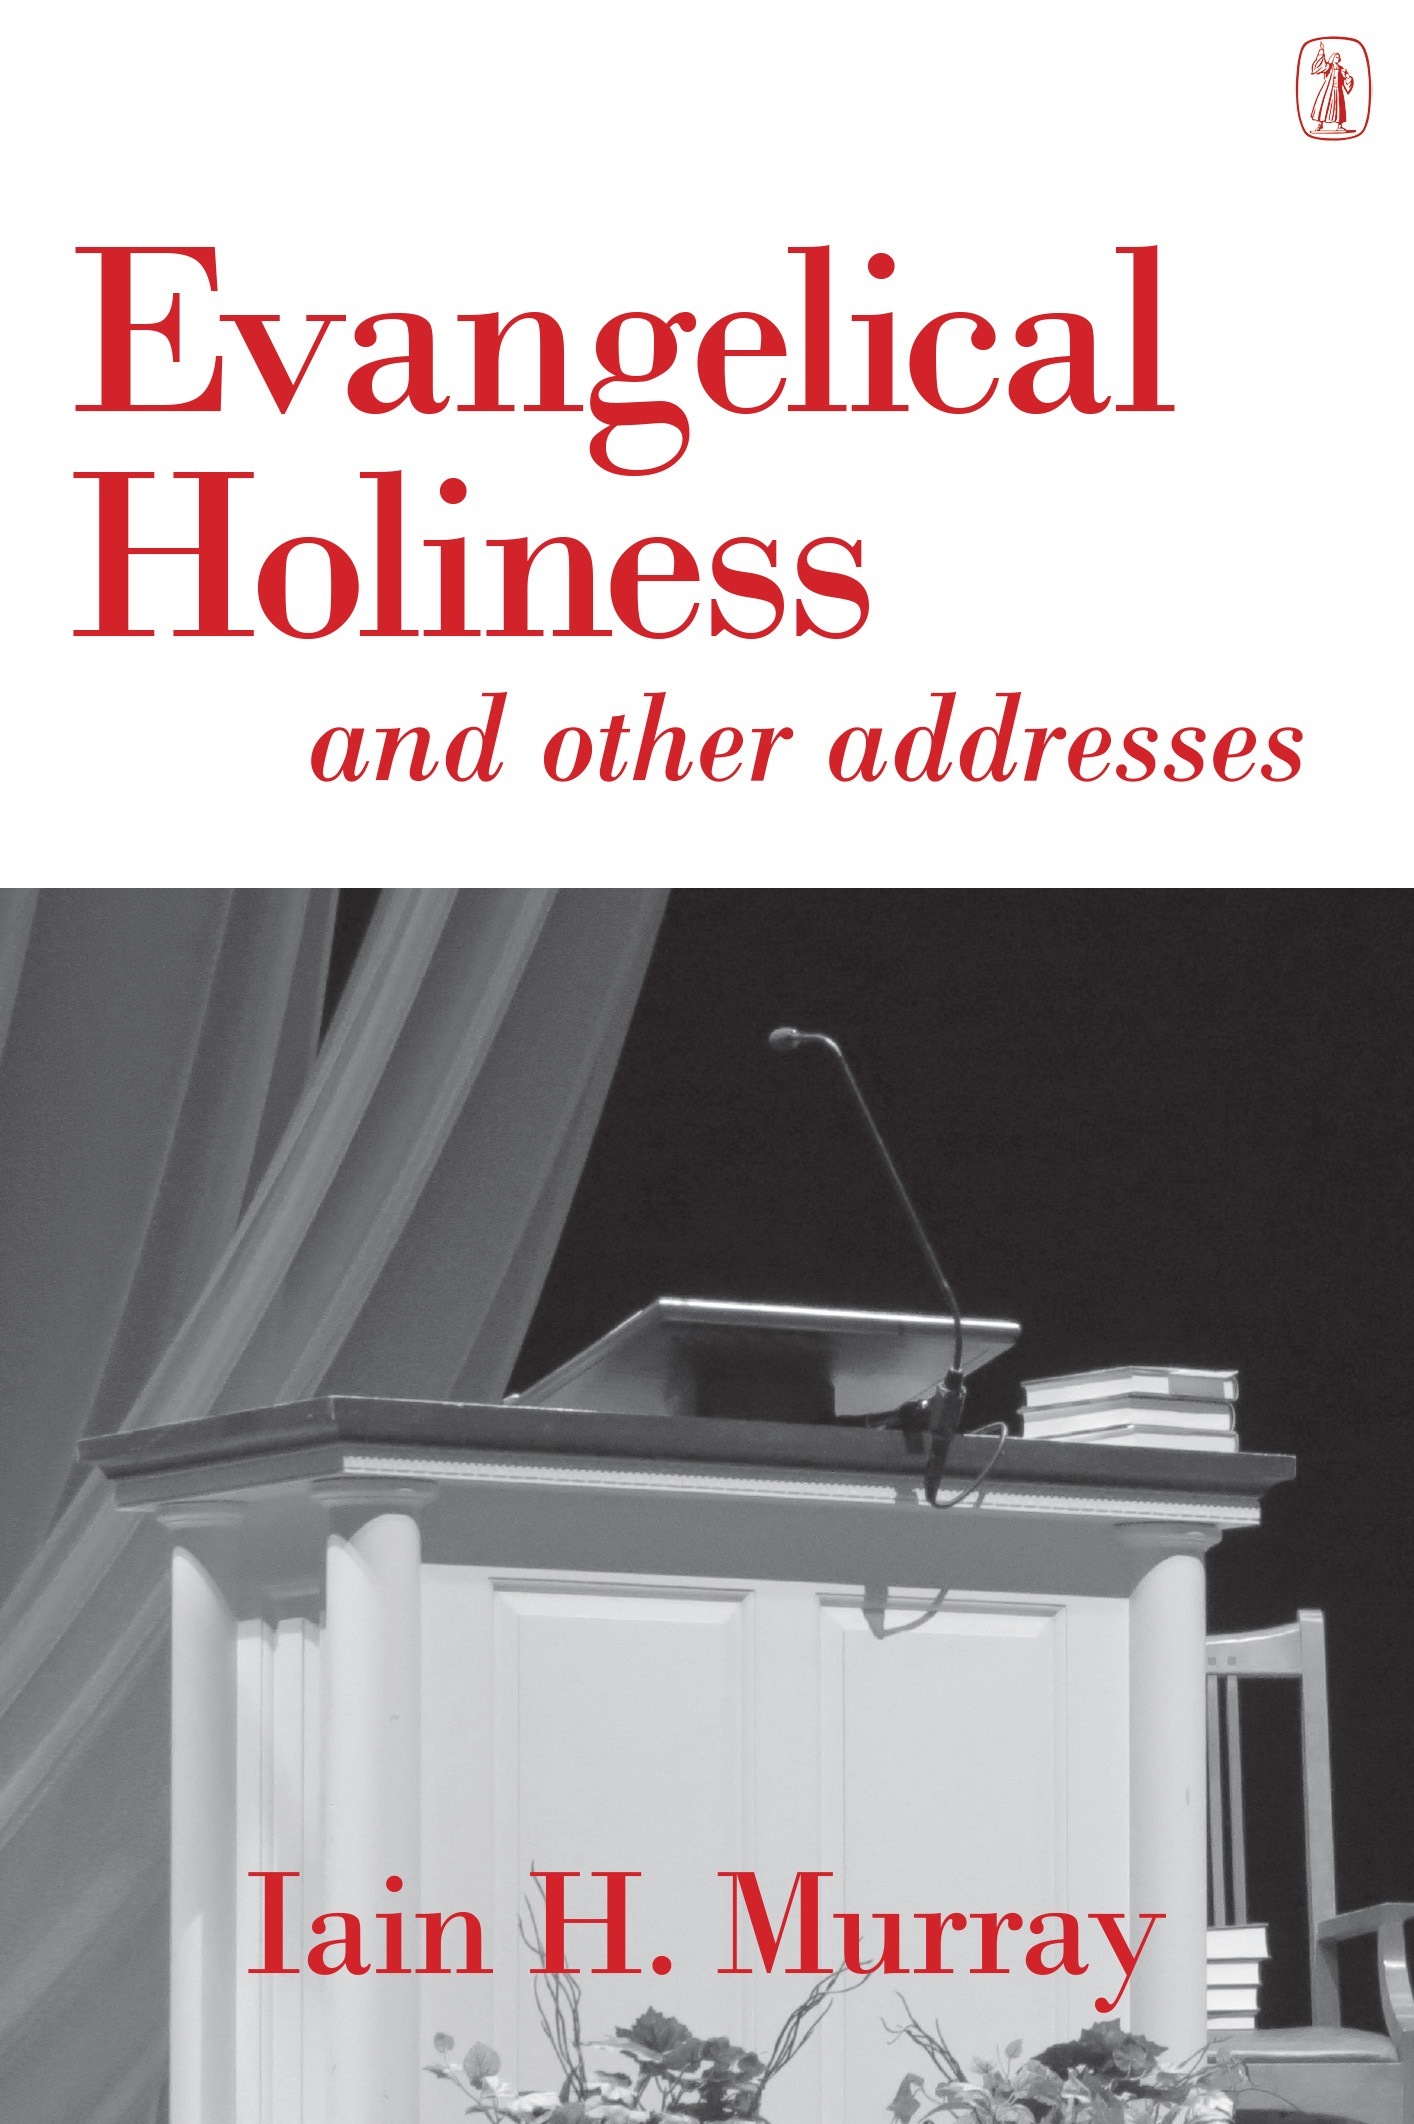 Book Cover For 'Evangelical Holiness'